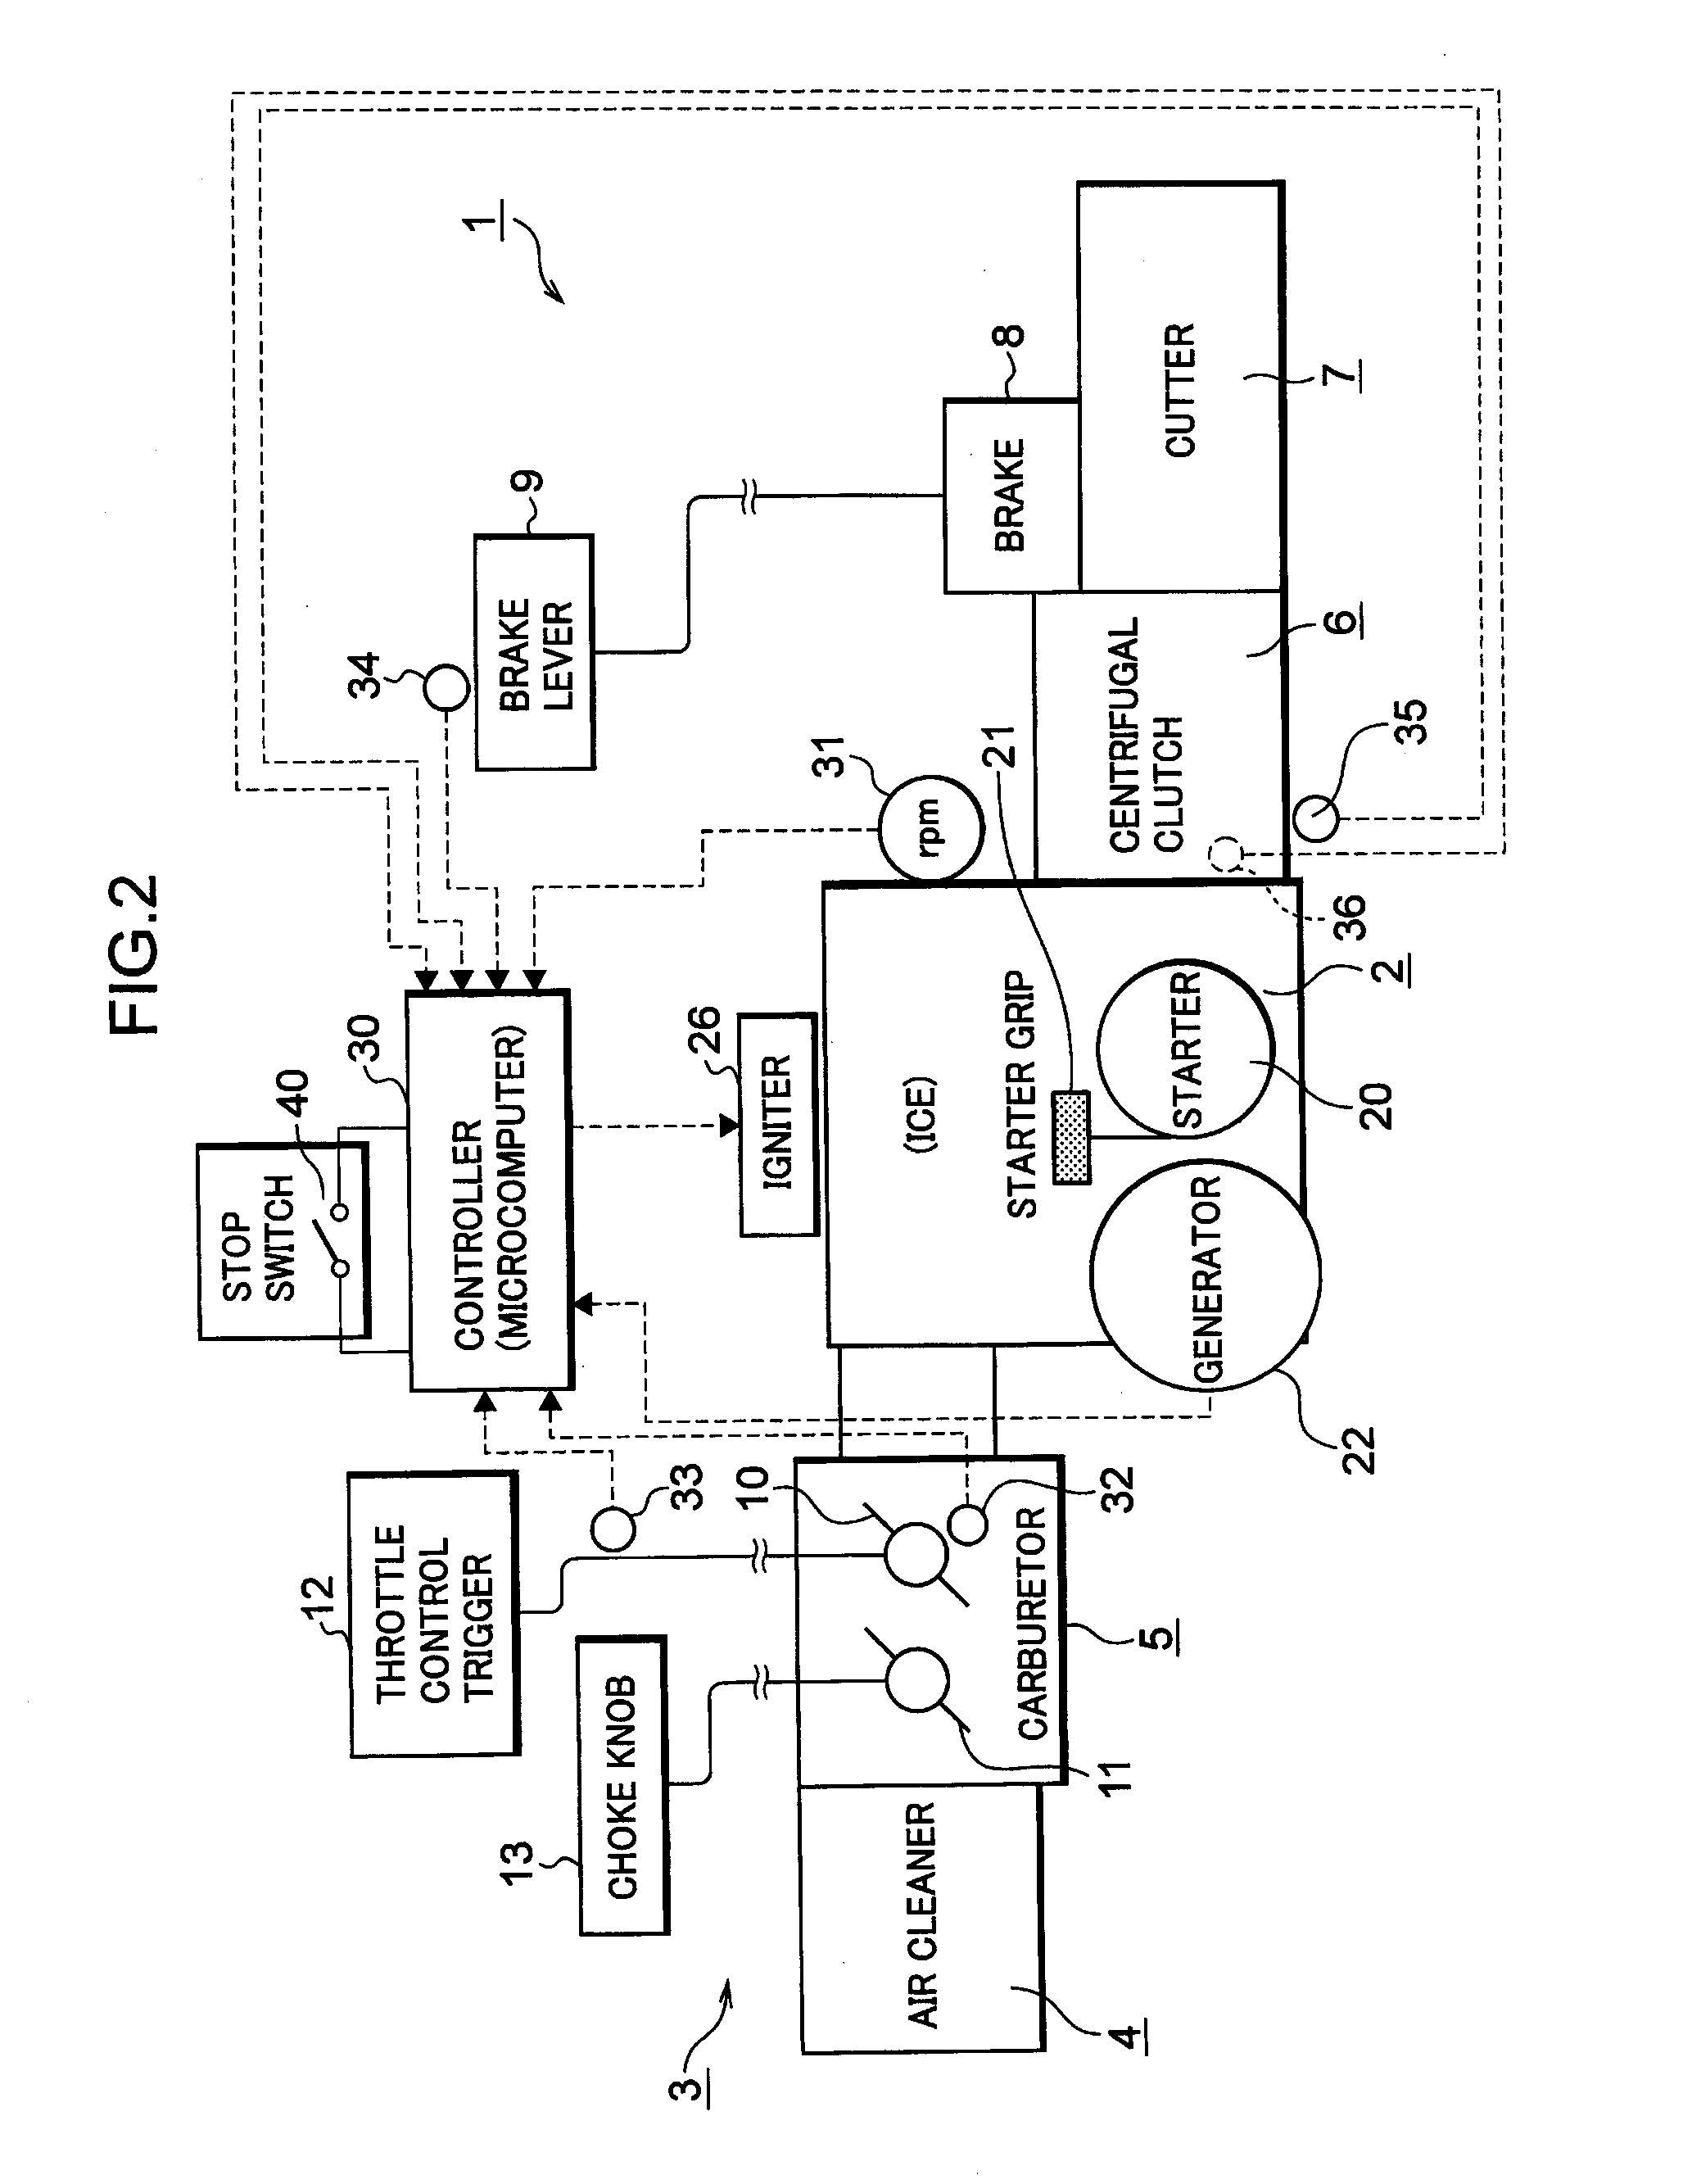 Work Apparatus With Internal Combustion Engine